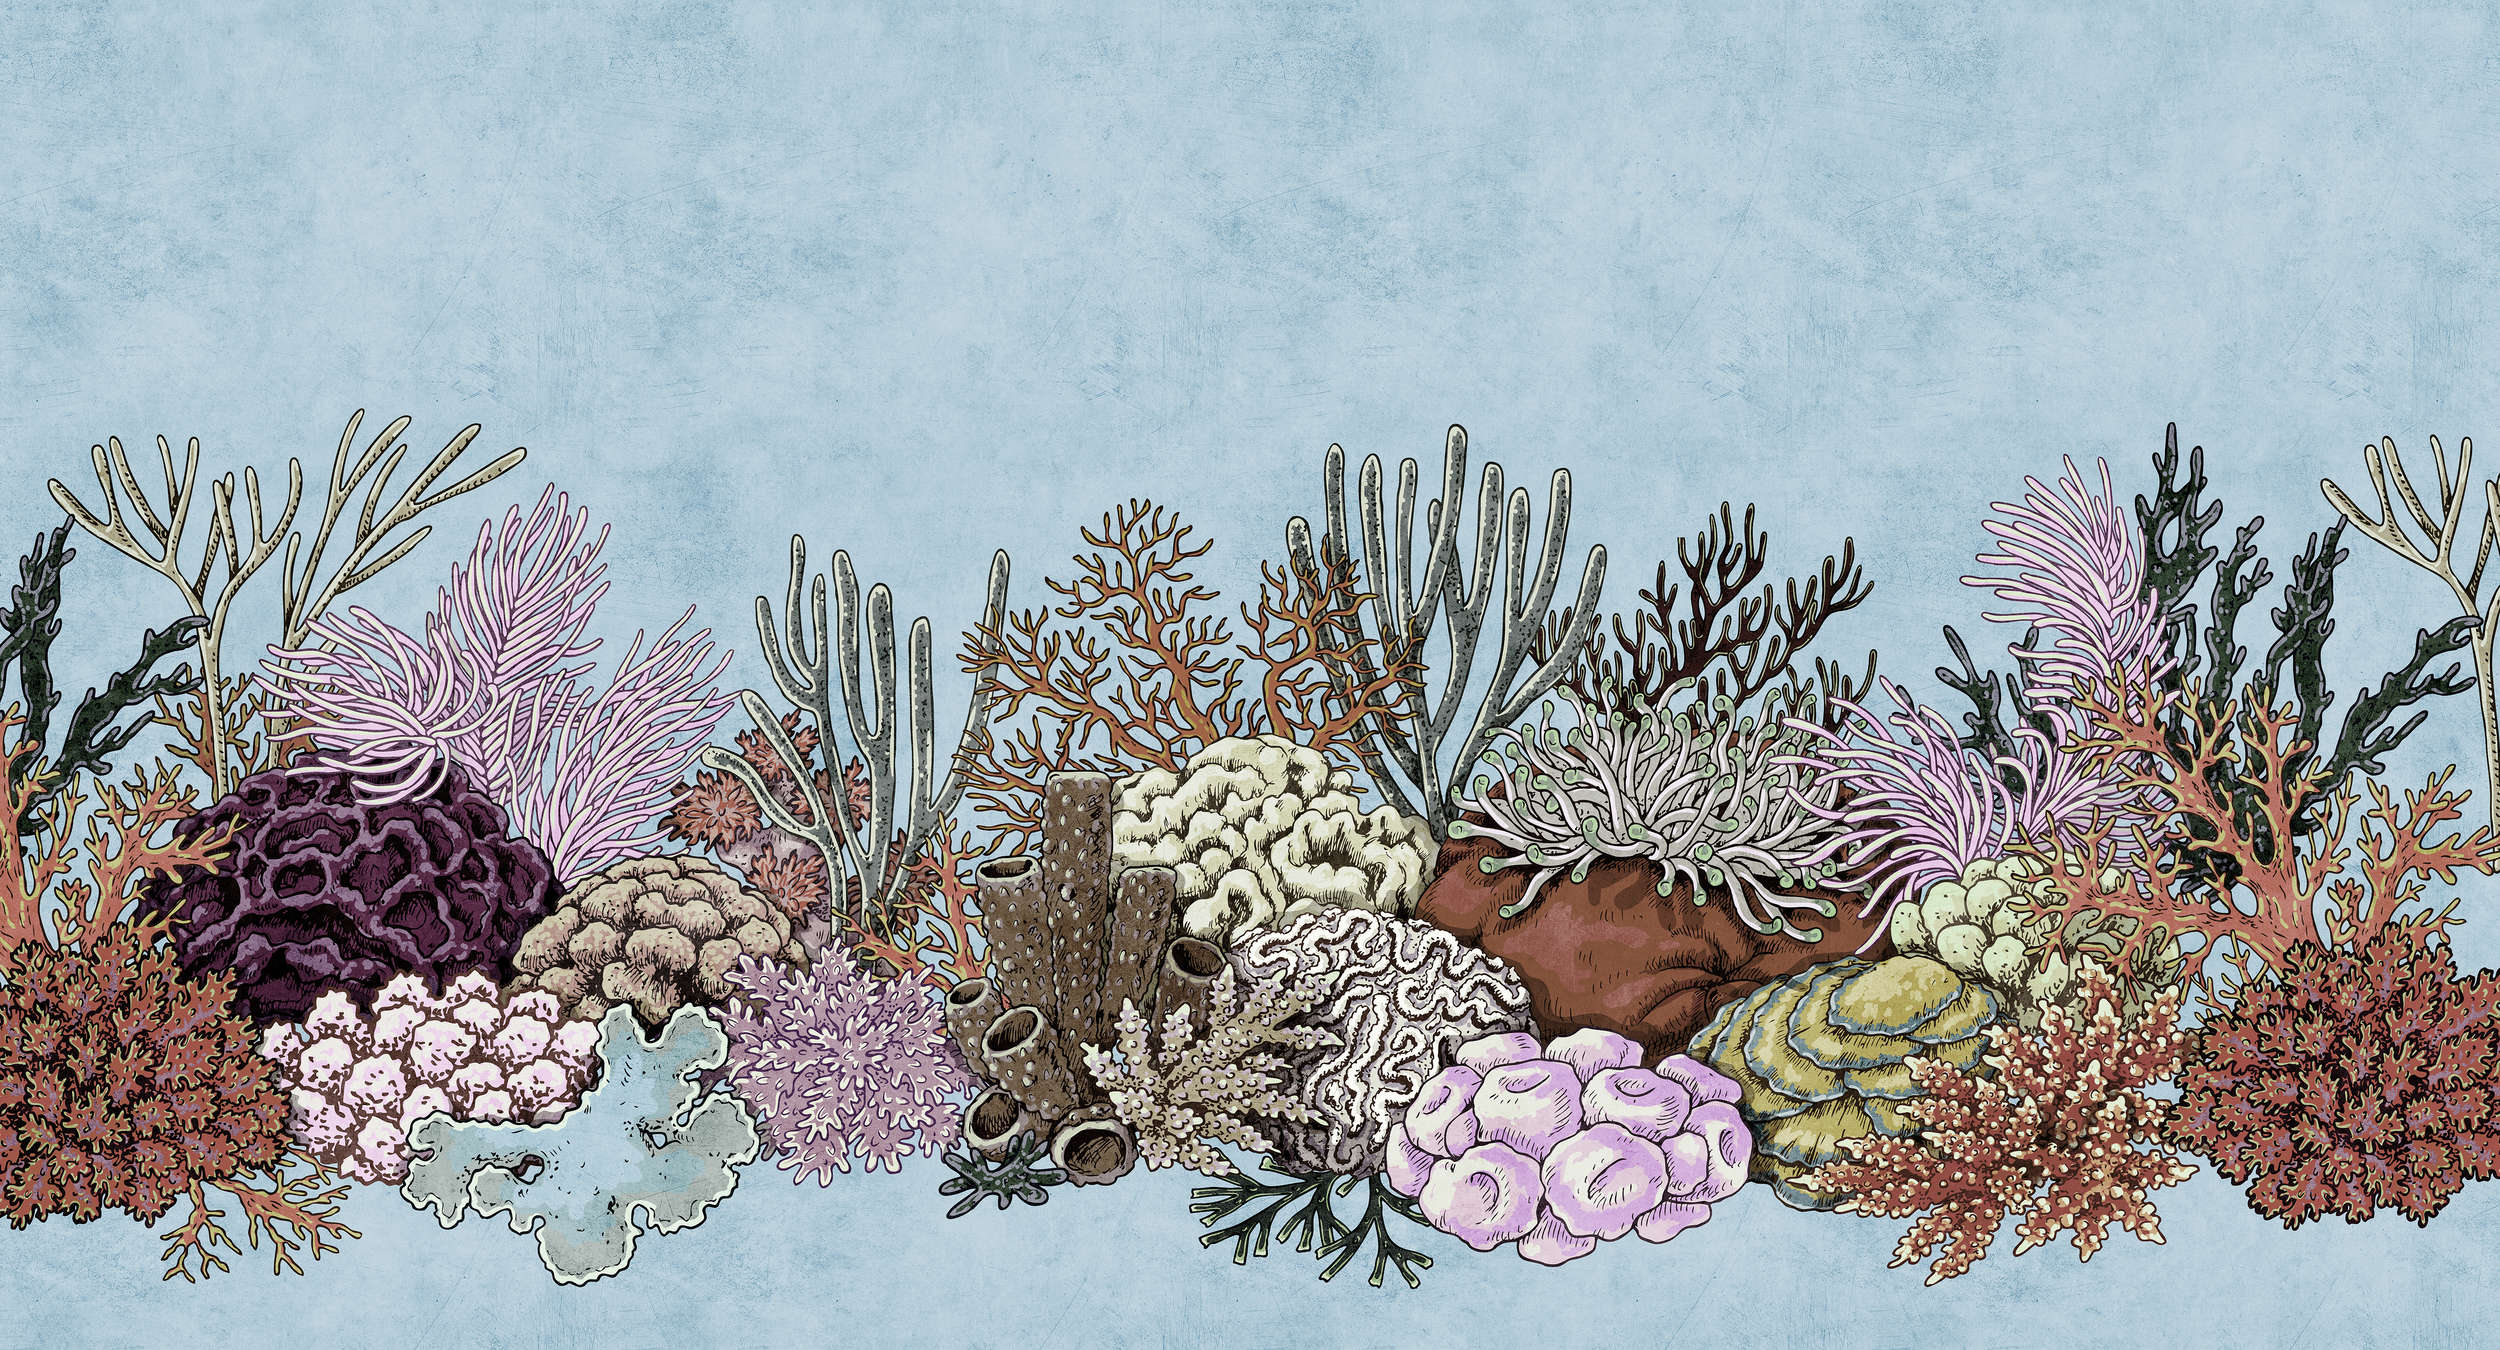             Octopus's Garden 1 - Underwater Wallpaper with Corals in Blotting Paper Structure - Blue, Pink | Premium Smooth Non-woven
        